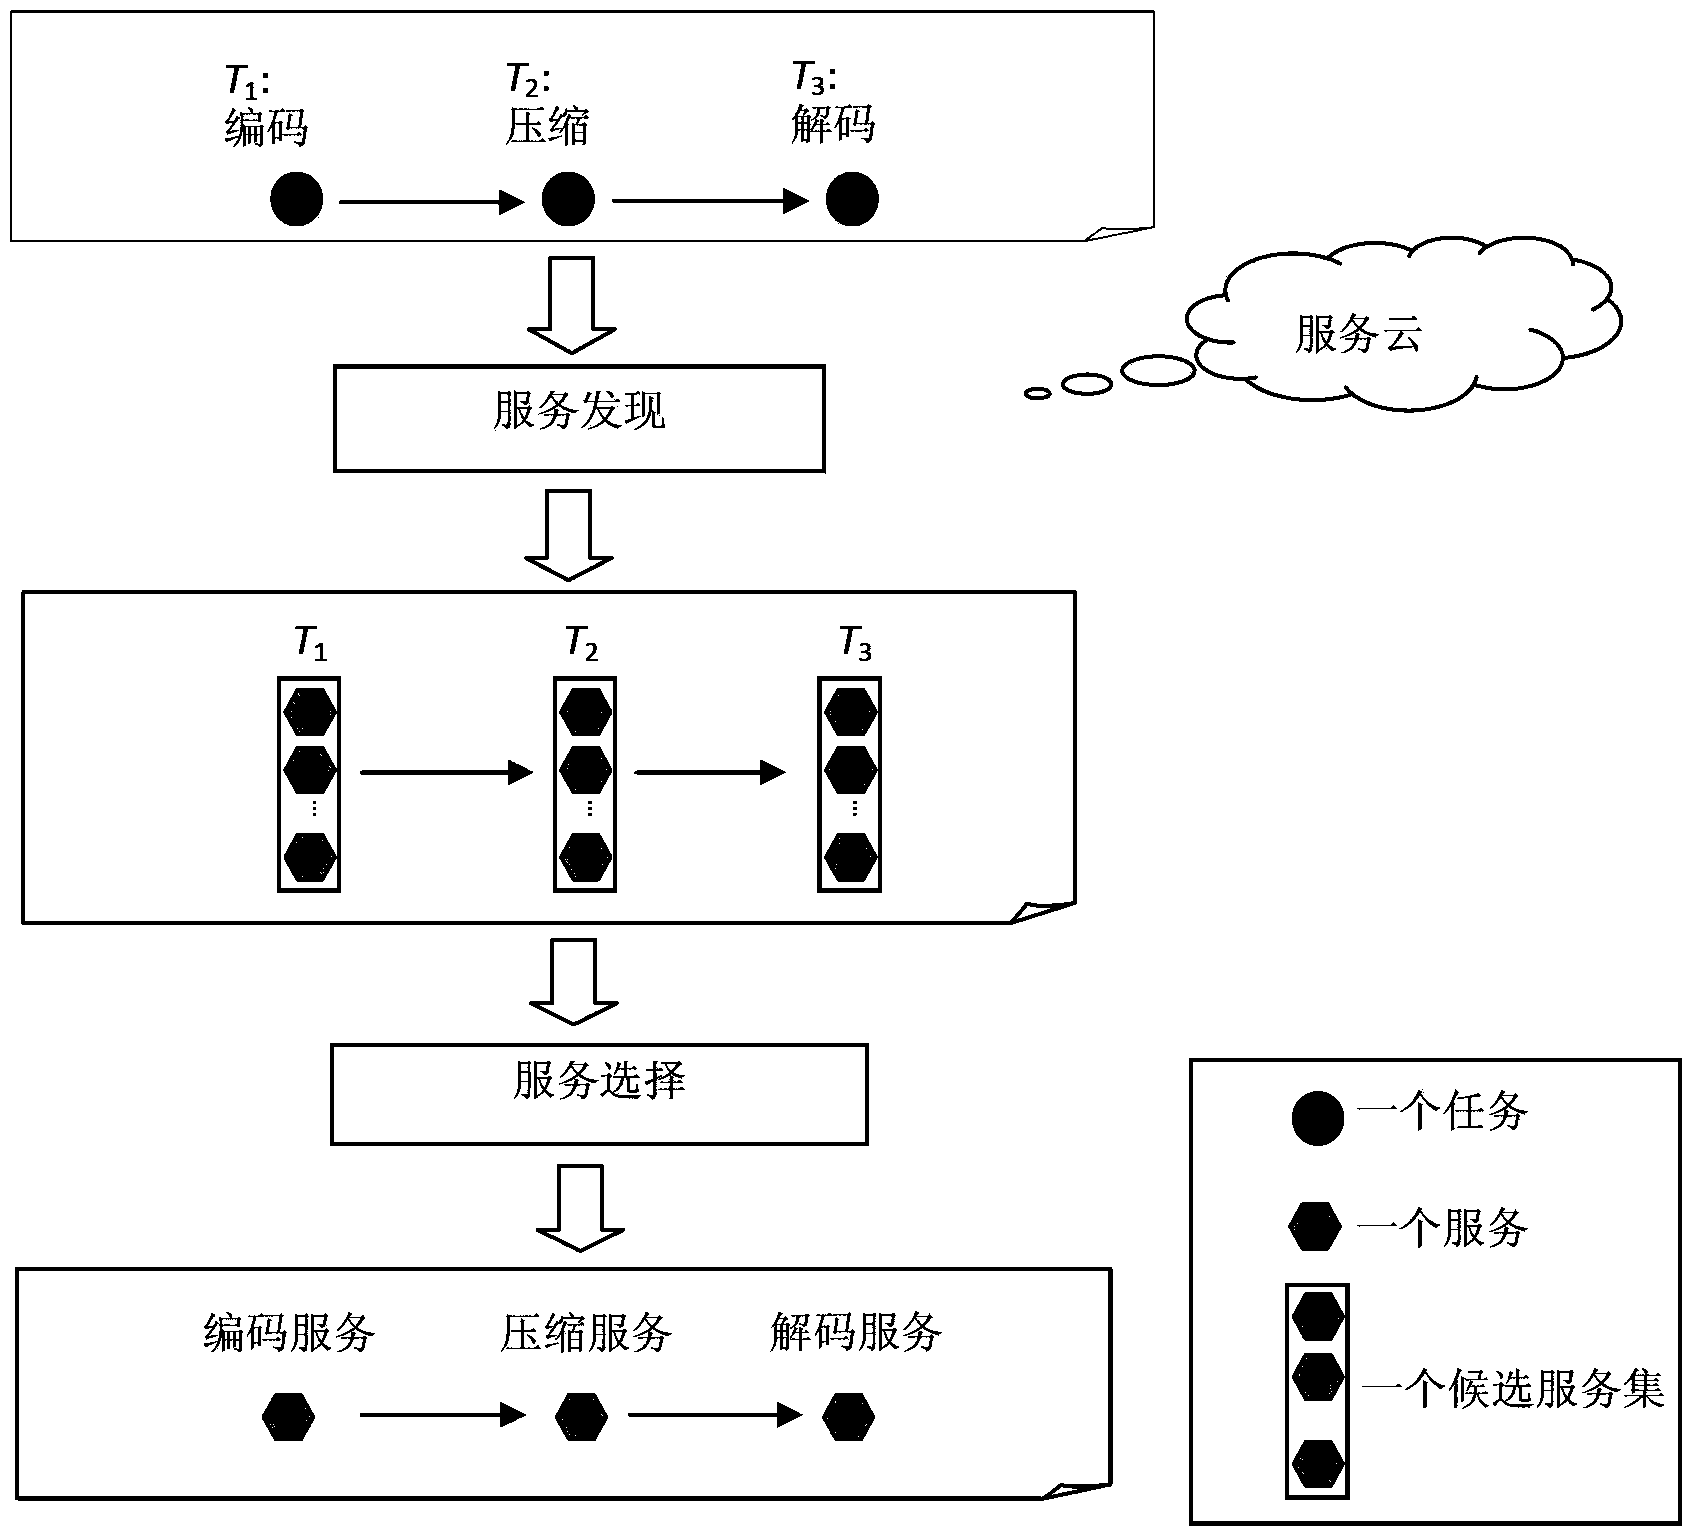 Method for selecting web services guided by user certainty degree in Cloud environment